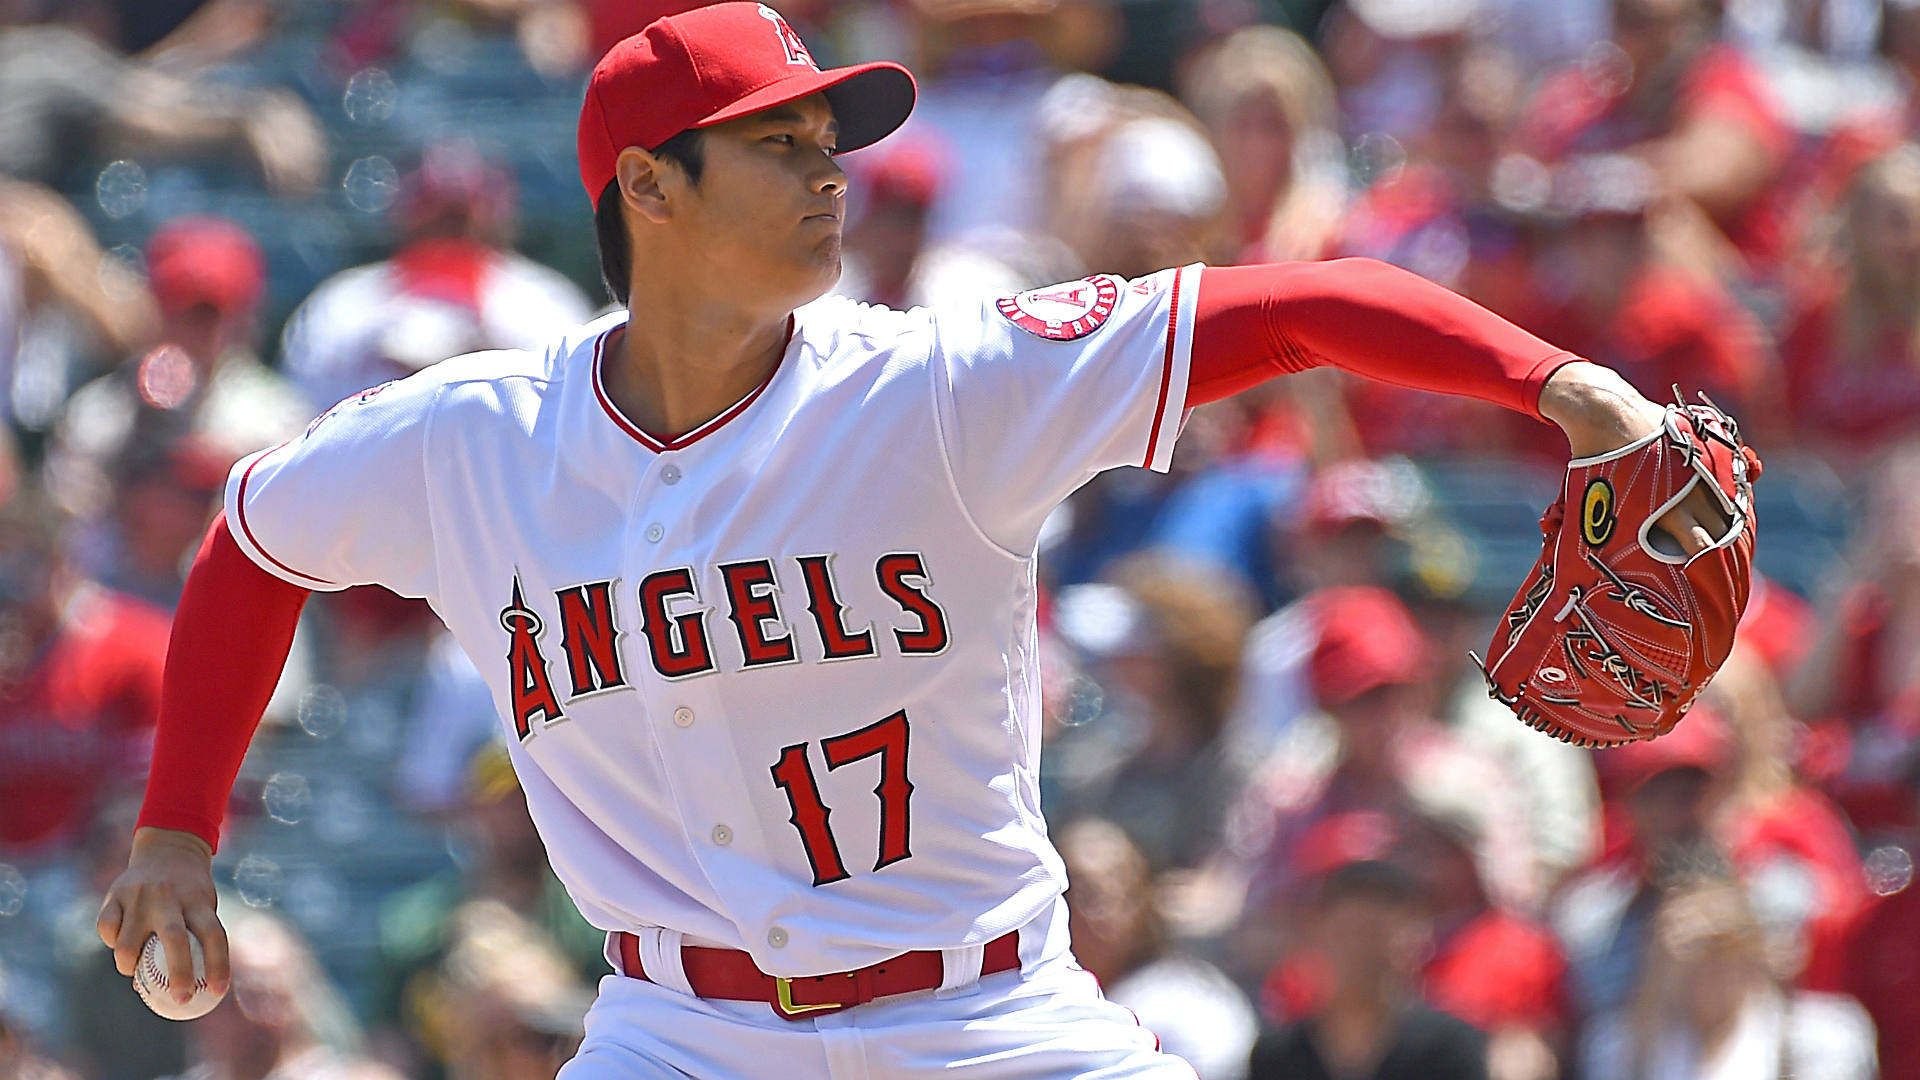 Shohei Ohtani is the real deal, so we should go ahead and declare it